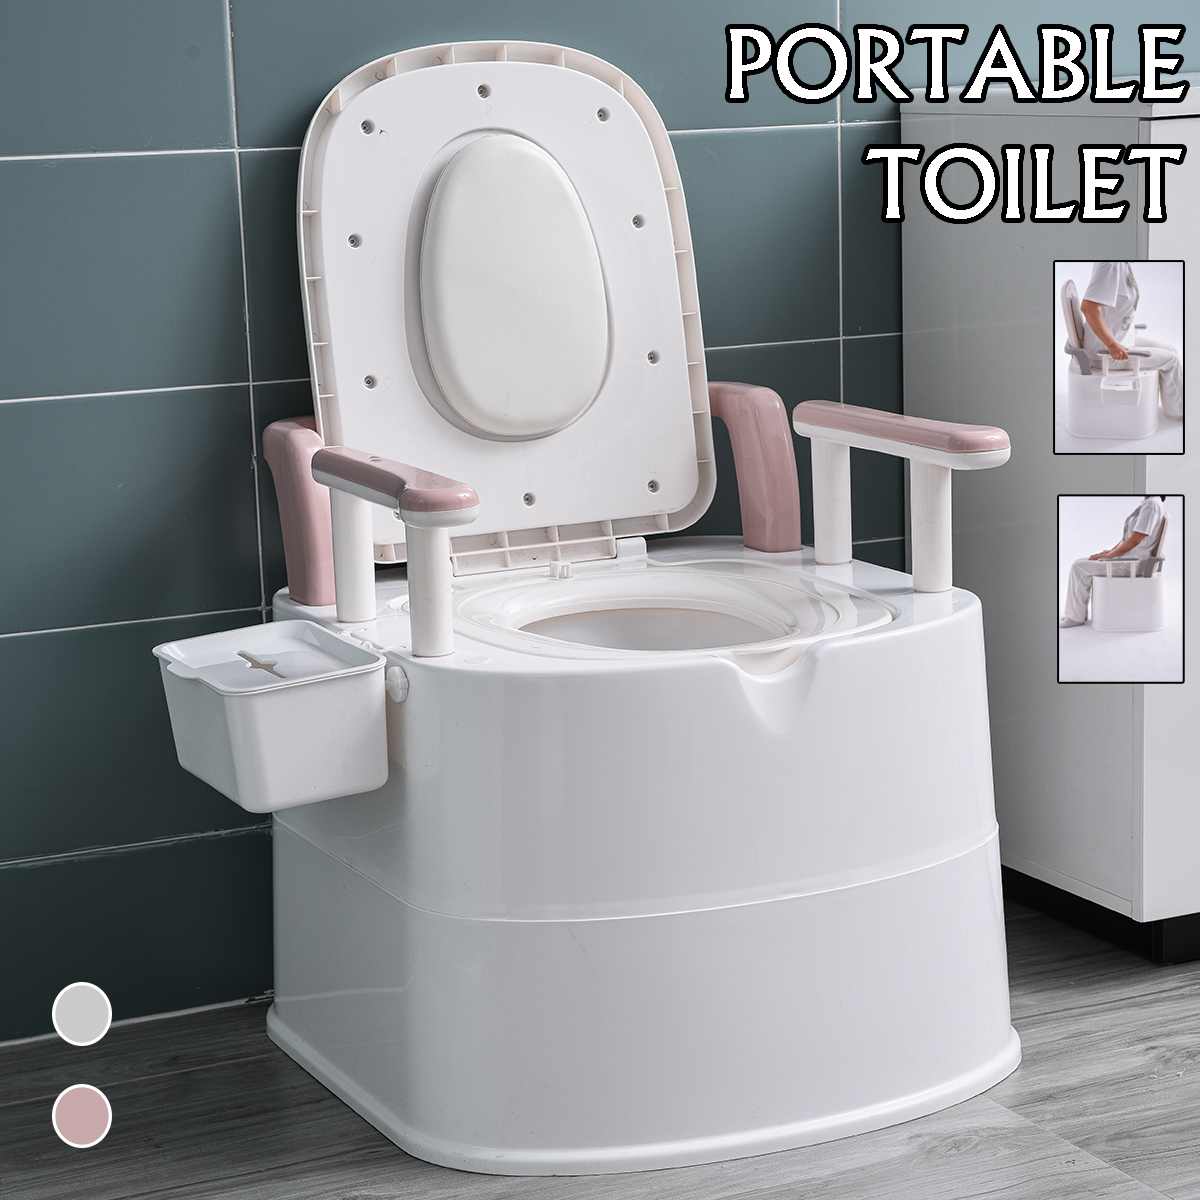 Portable Toilet for the Elderly, Pregnant Woman, Kids, Removable Toilet for Home Bathroom, Potty Commode for Outdoor Camping